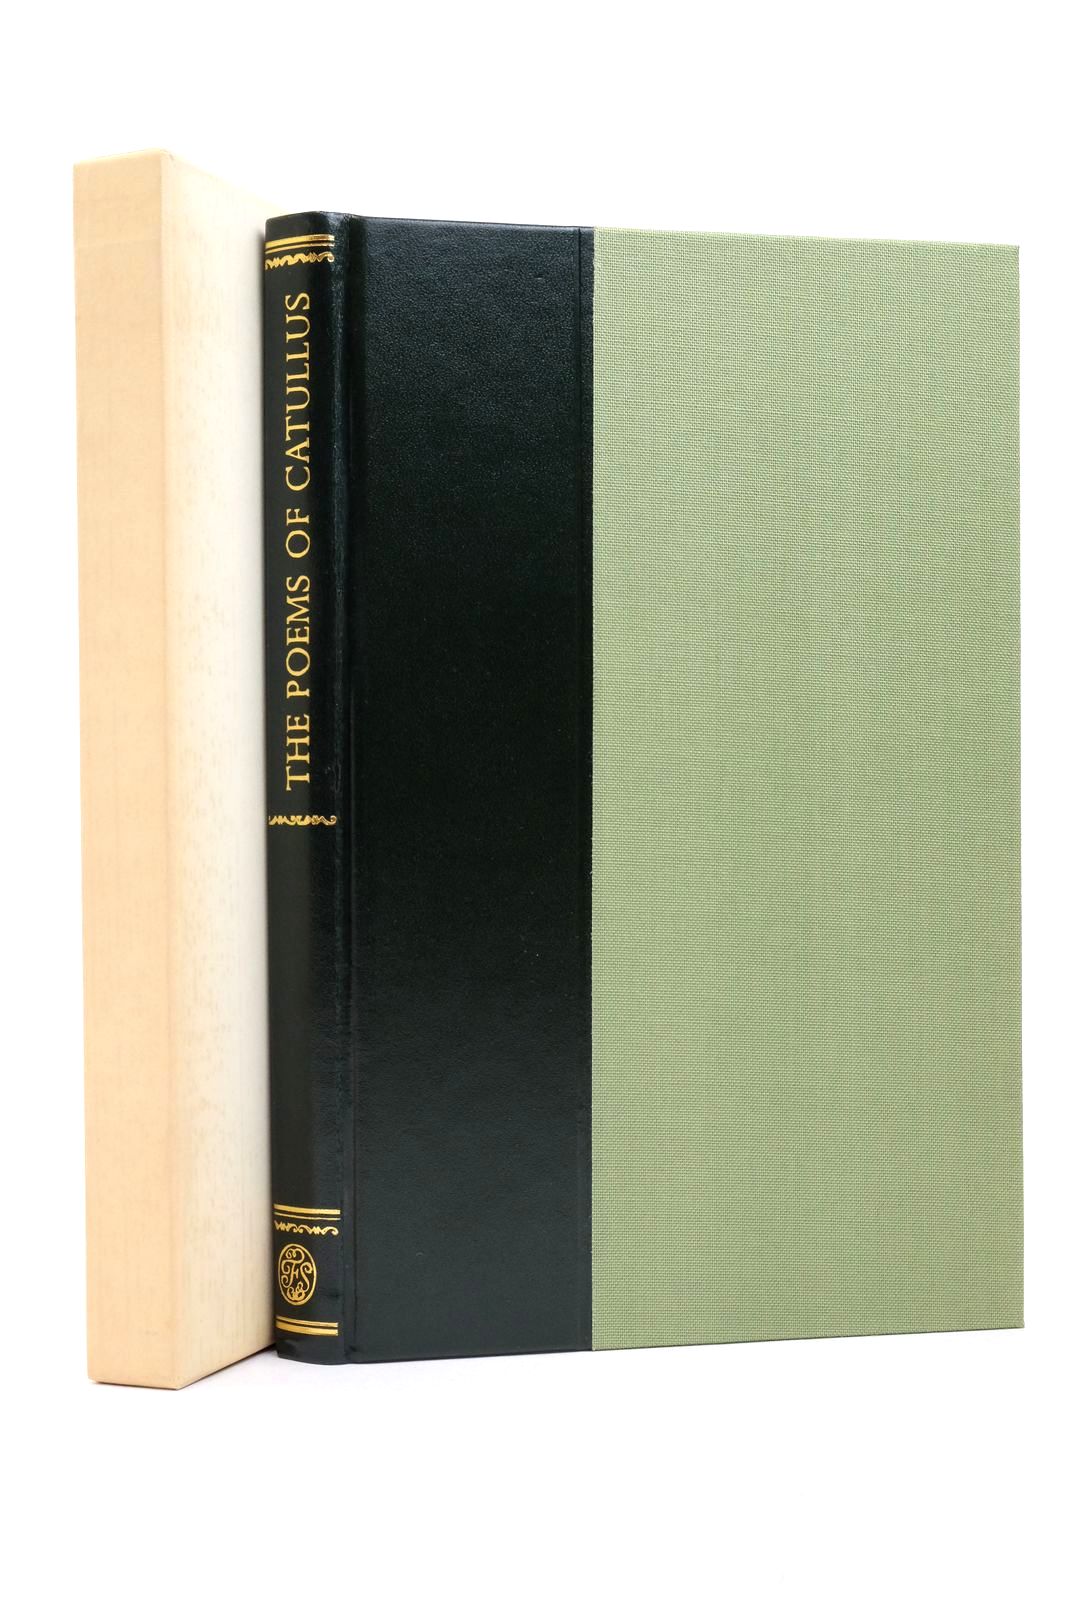 Photo of THE POEMS OF CATULLUS written by Catullus,  Michie, James Ewart, Gavin published by Folio Society (STOCK CODE: 2138291)  for sale by Stella & Rose's Books